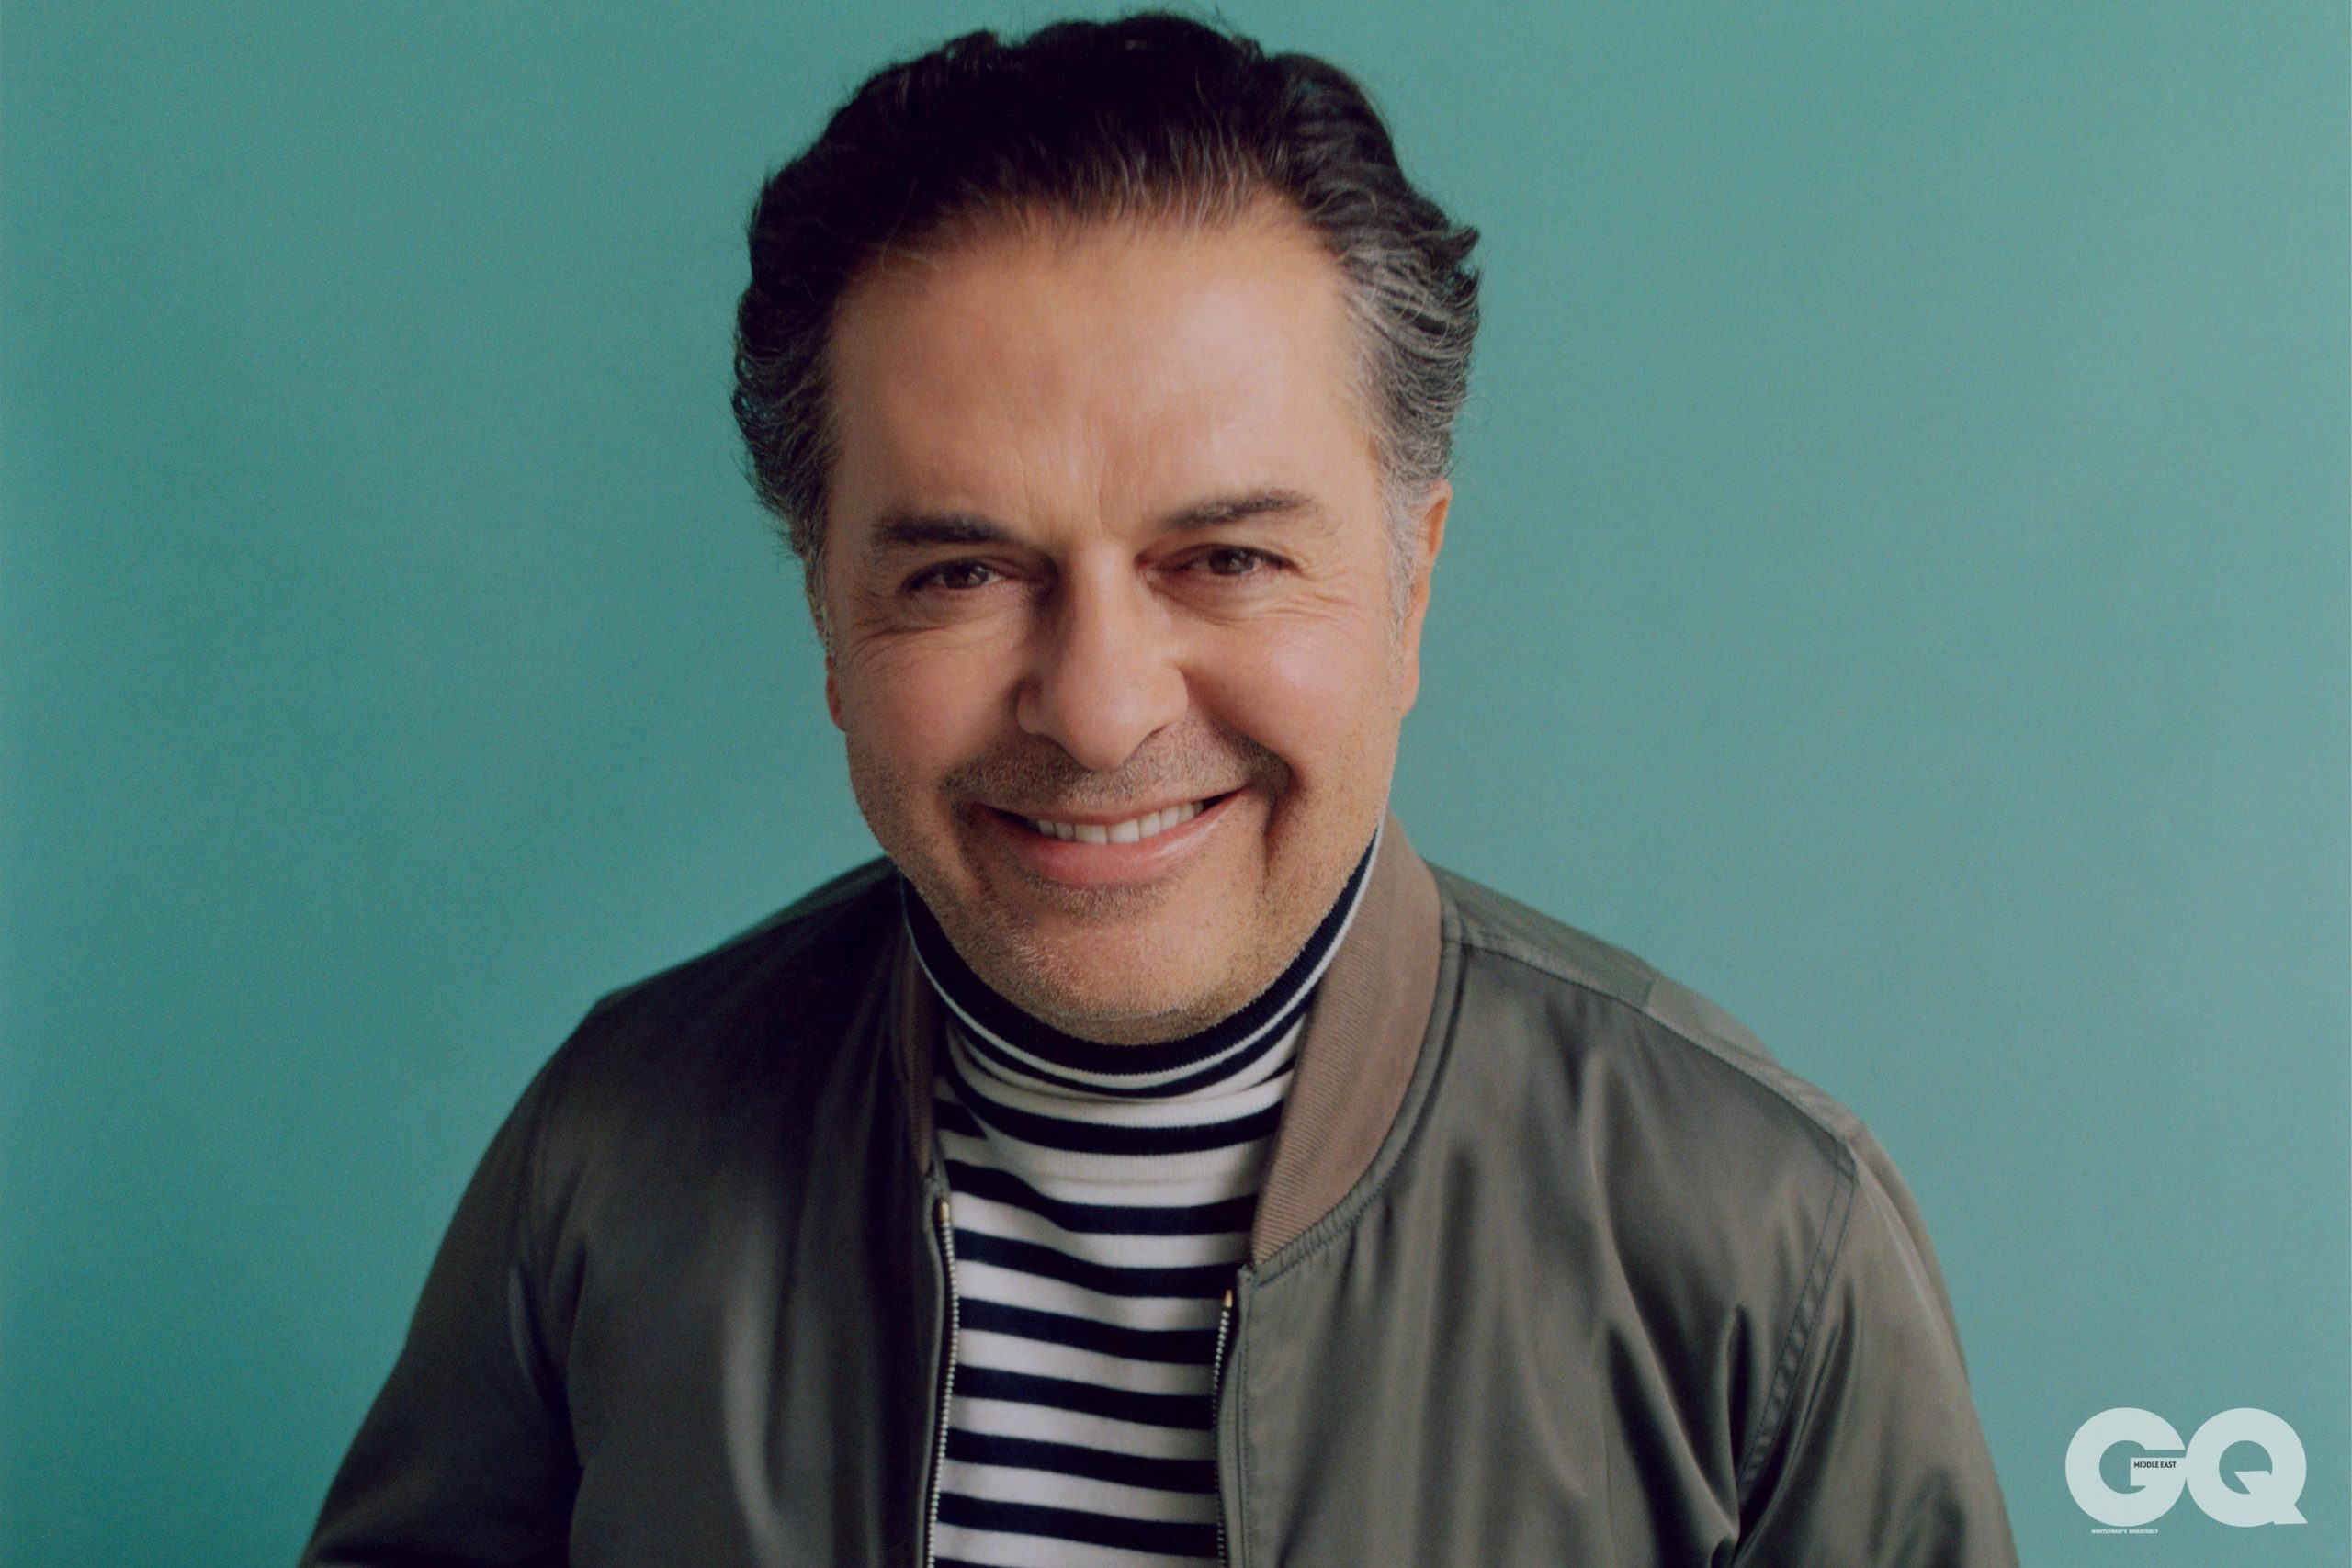 Ragheb Alama Wants You To Stay Positive - GQ Middle East